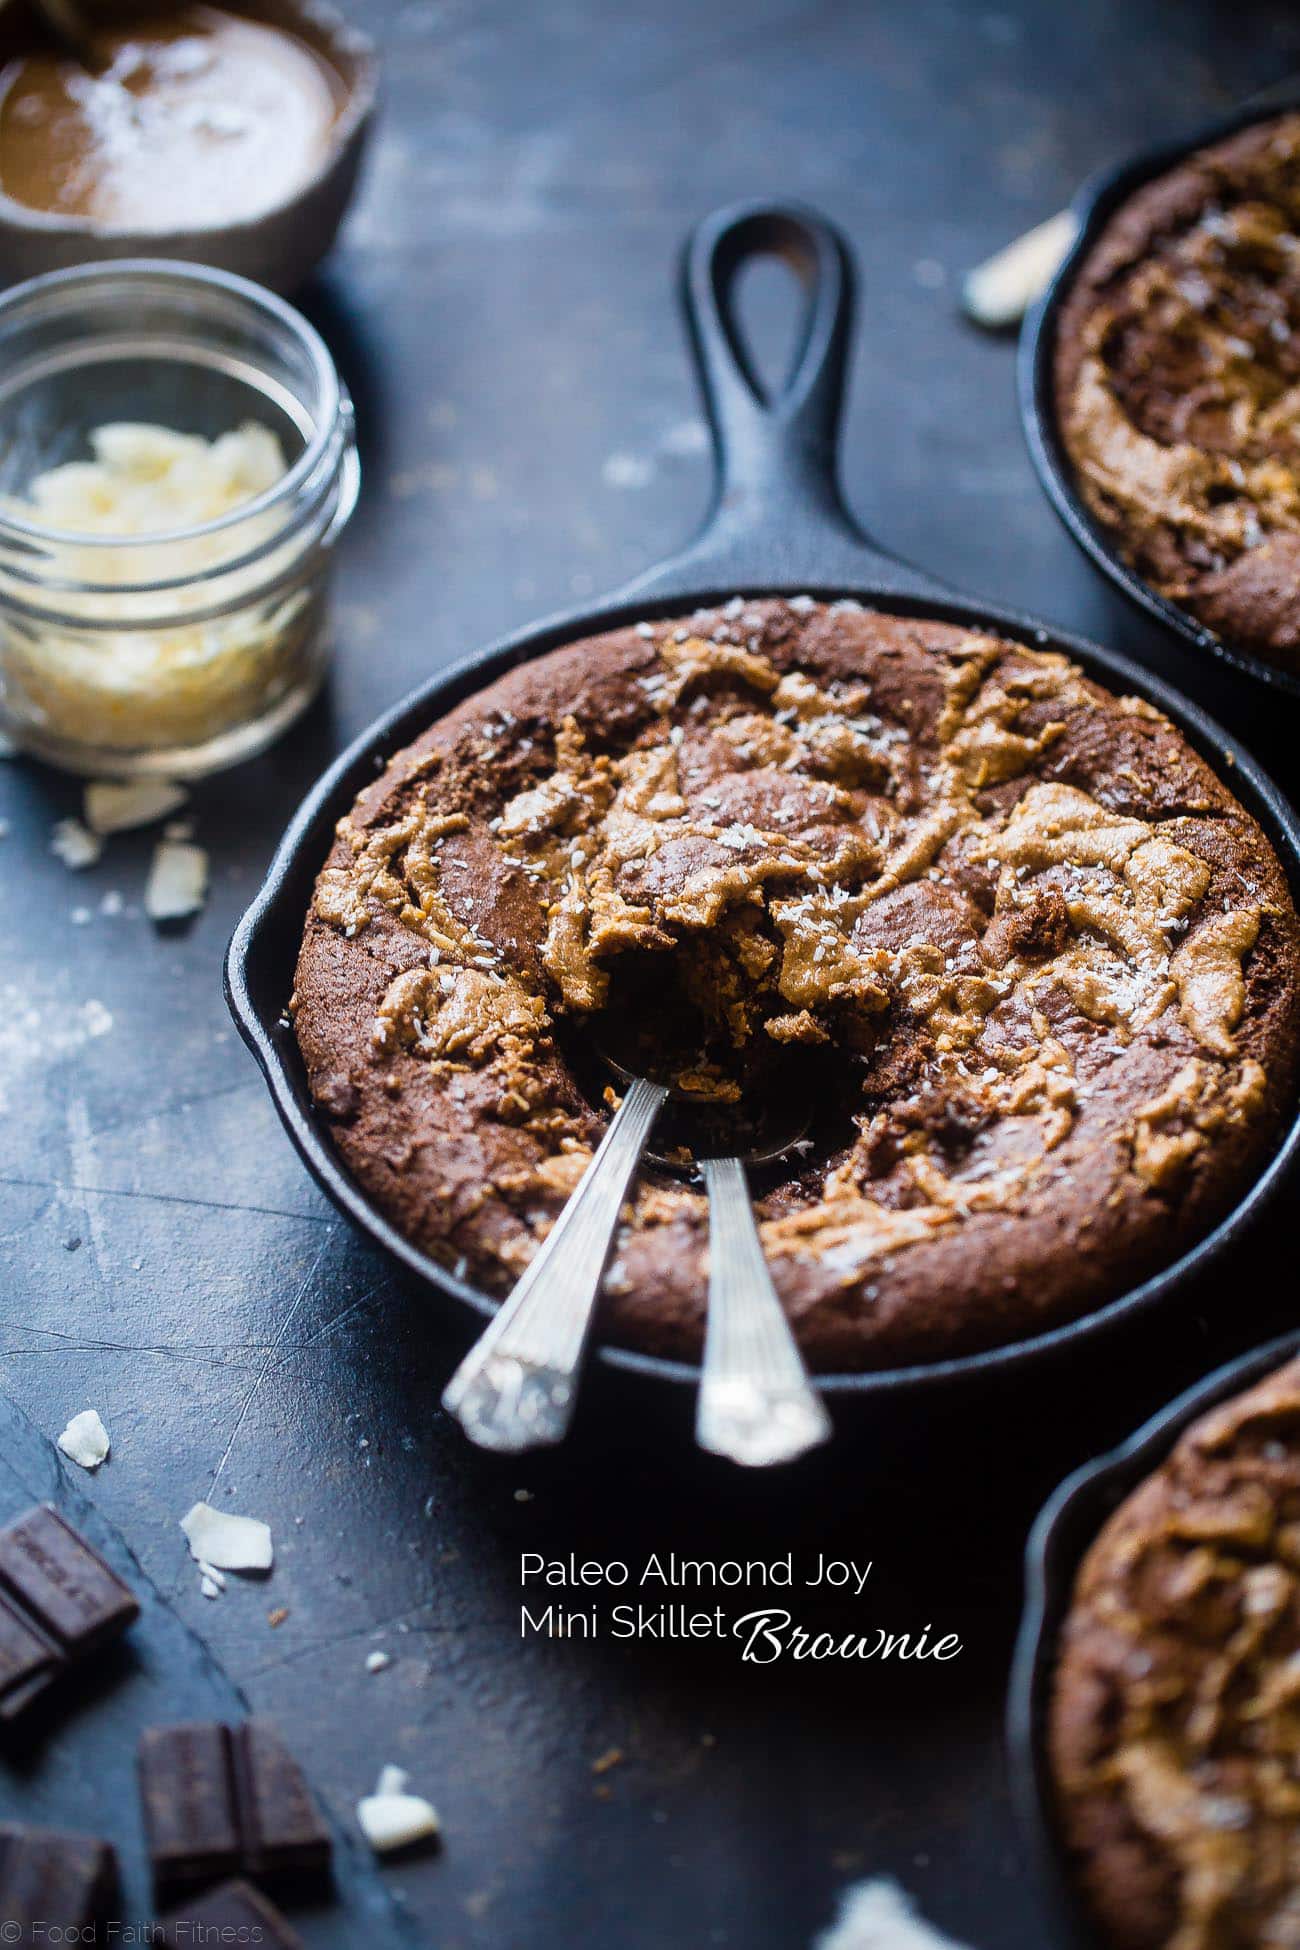 Gluten Free "Almond Joy" Skillet Brownies - These rich, fudgy coconut almond skillet brownies are made in one bowl! They're a paleo friendly, healthier dessert that everyone will love! | Foodfaithfitness.com | @FoodFaithFit